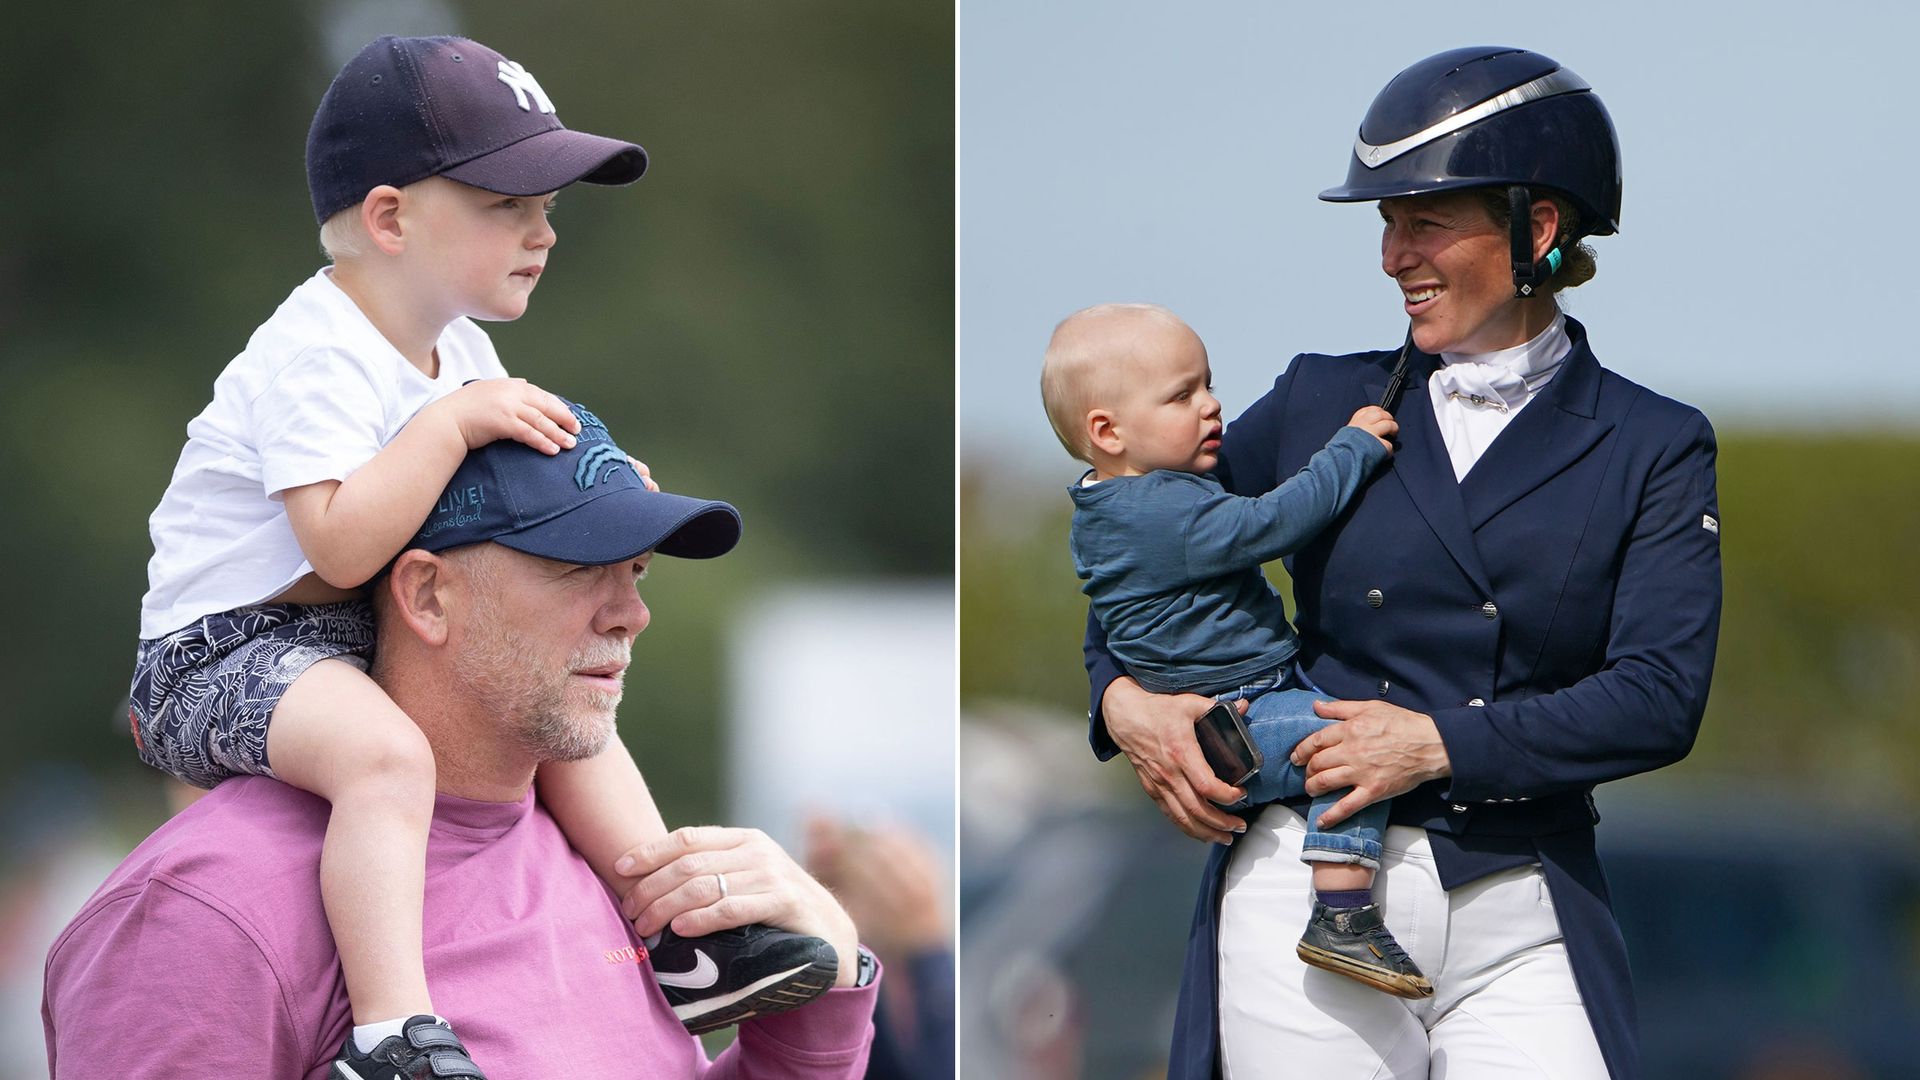 Lucas Tindall with his parents, Mike and Zara Tindall